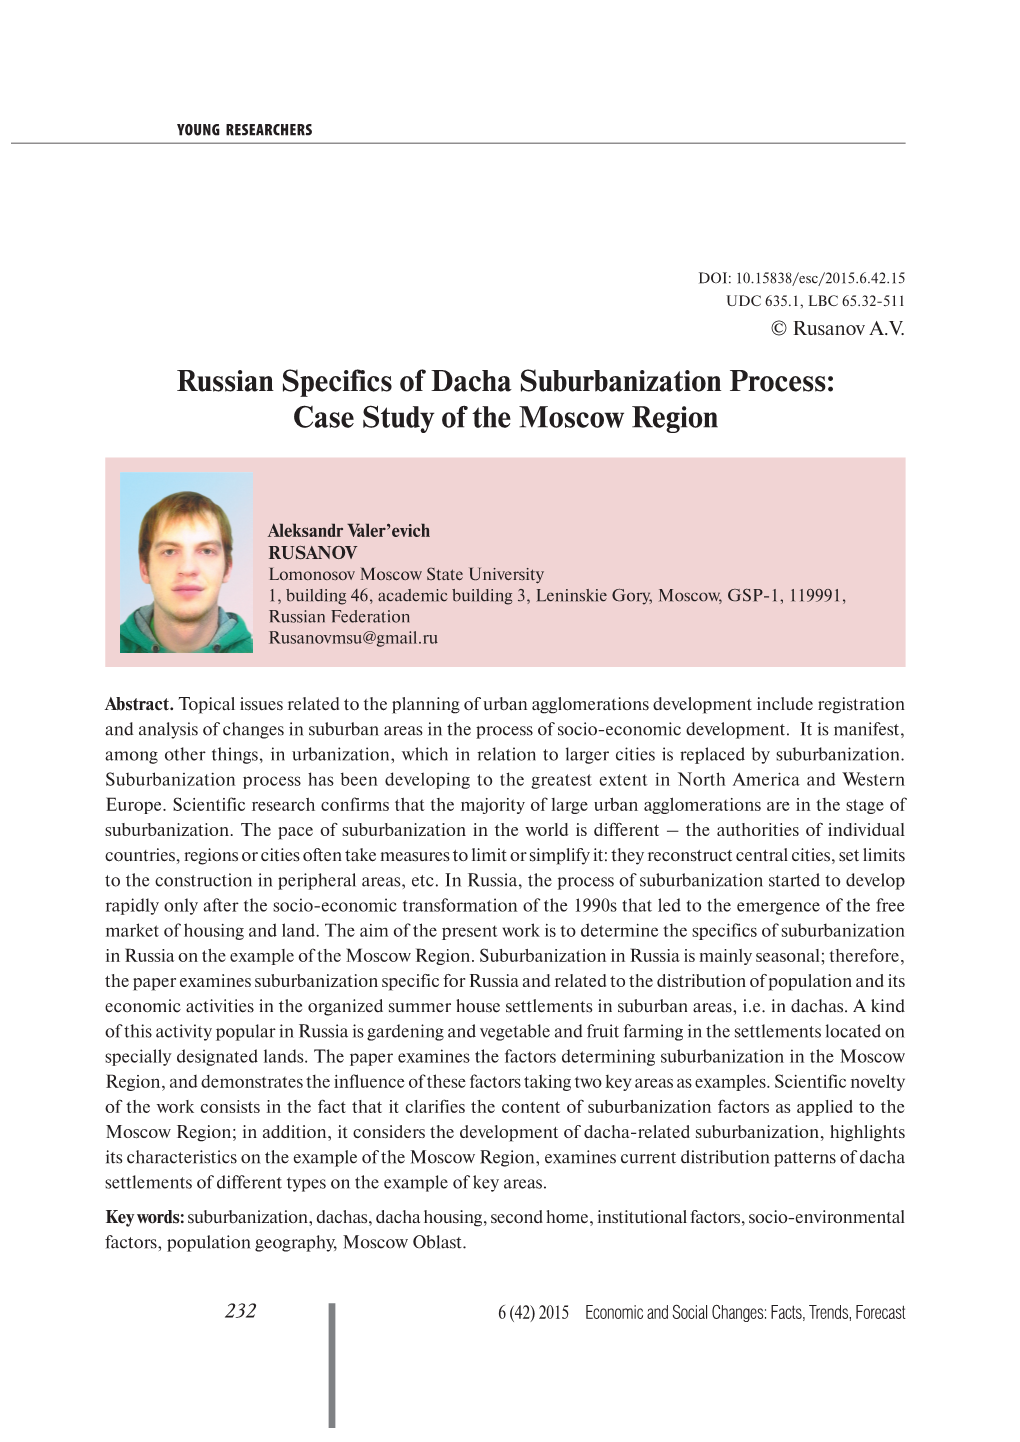 Russian Specifics of Dacha Suburbanization Process: Case Study of the Moscow Region